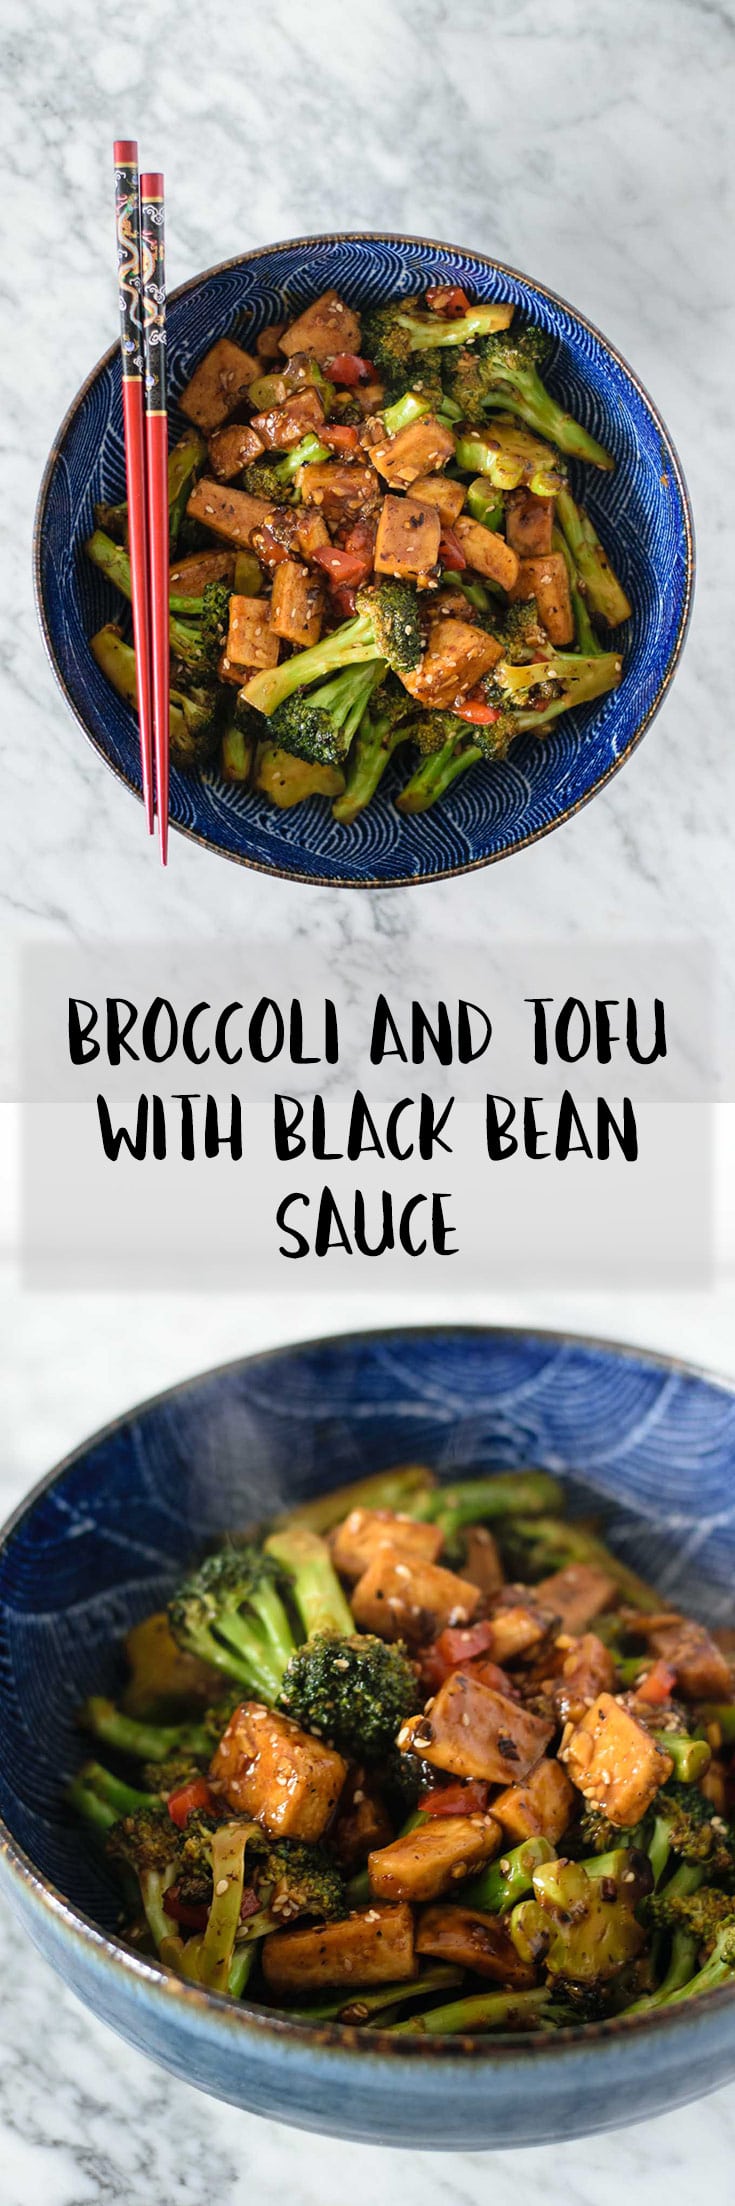 Broccoli and tofu are tossed in a spicy black bean sauce in this quick and easy chinese stir fry! A vegan and gluten-free recipe. | thecuriouschickpea.com #vegan #veganchinesefood